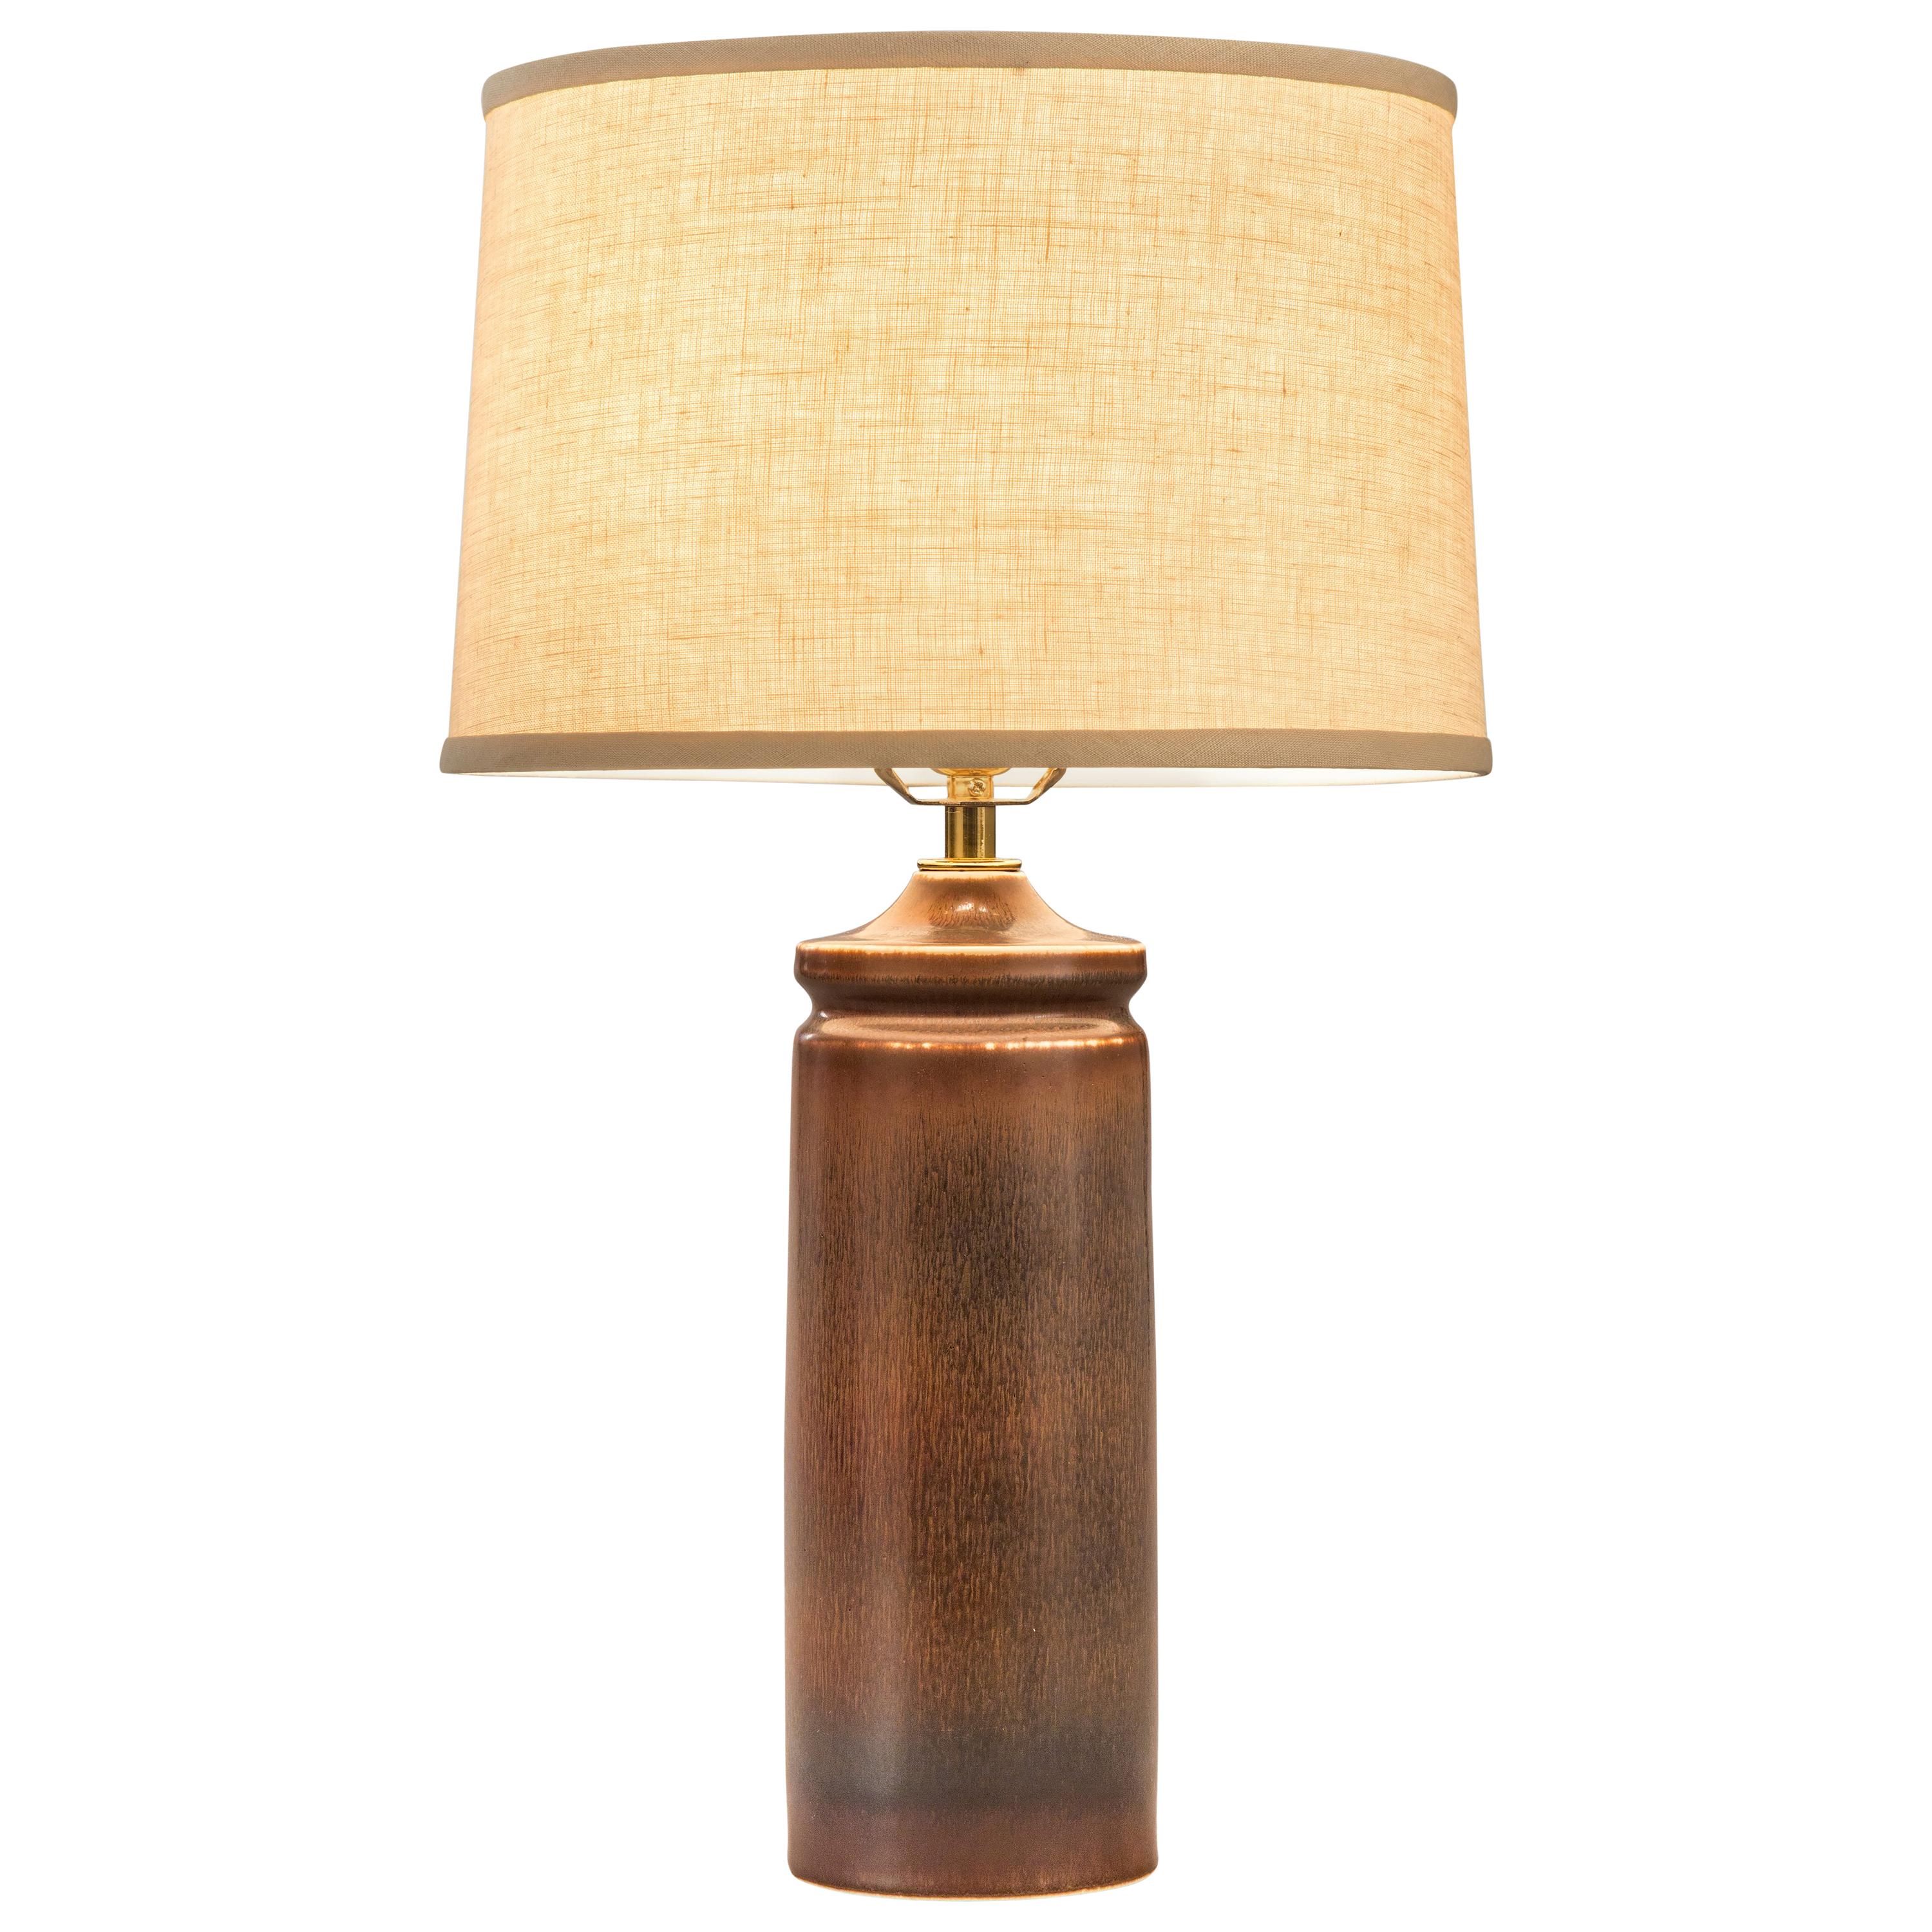 Carl Harry Stalhane, a Swedish Brown Earthenware Lamp For Sale